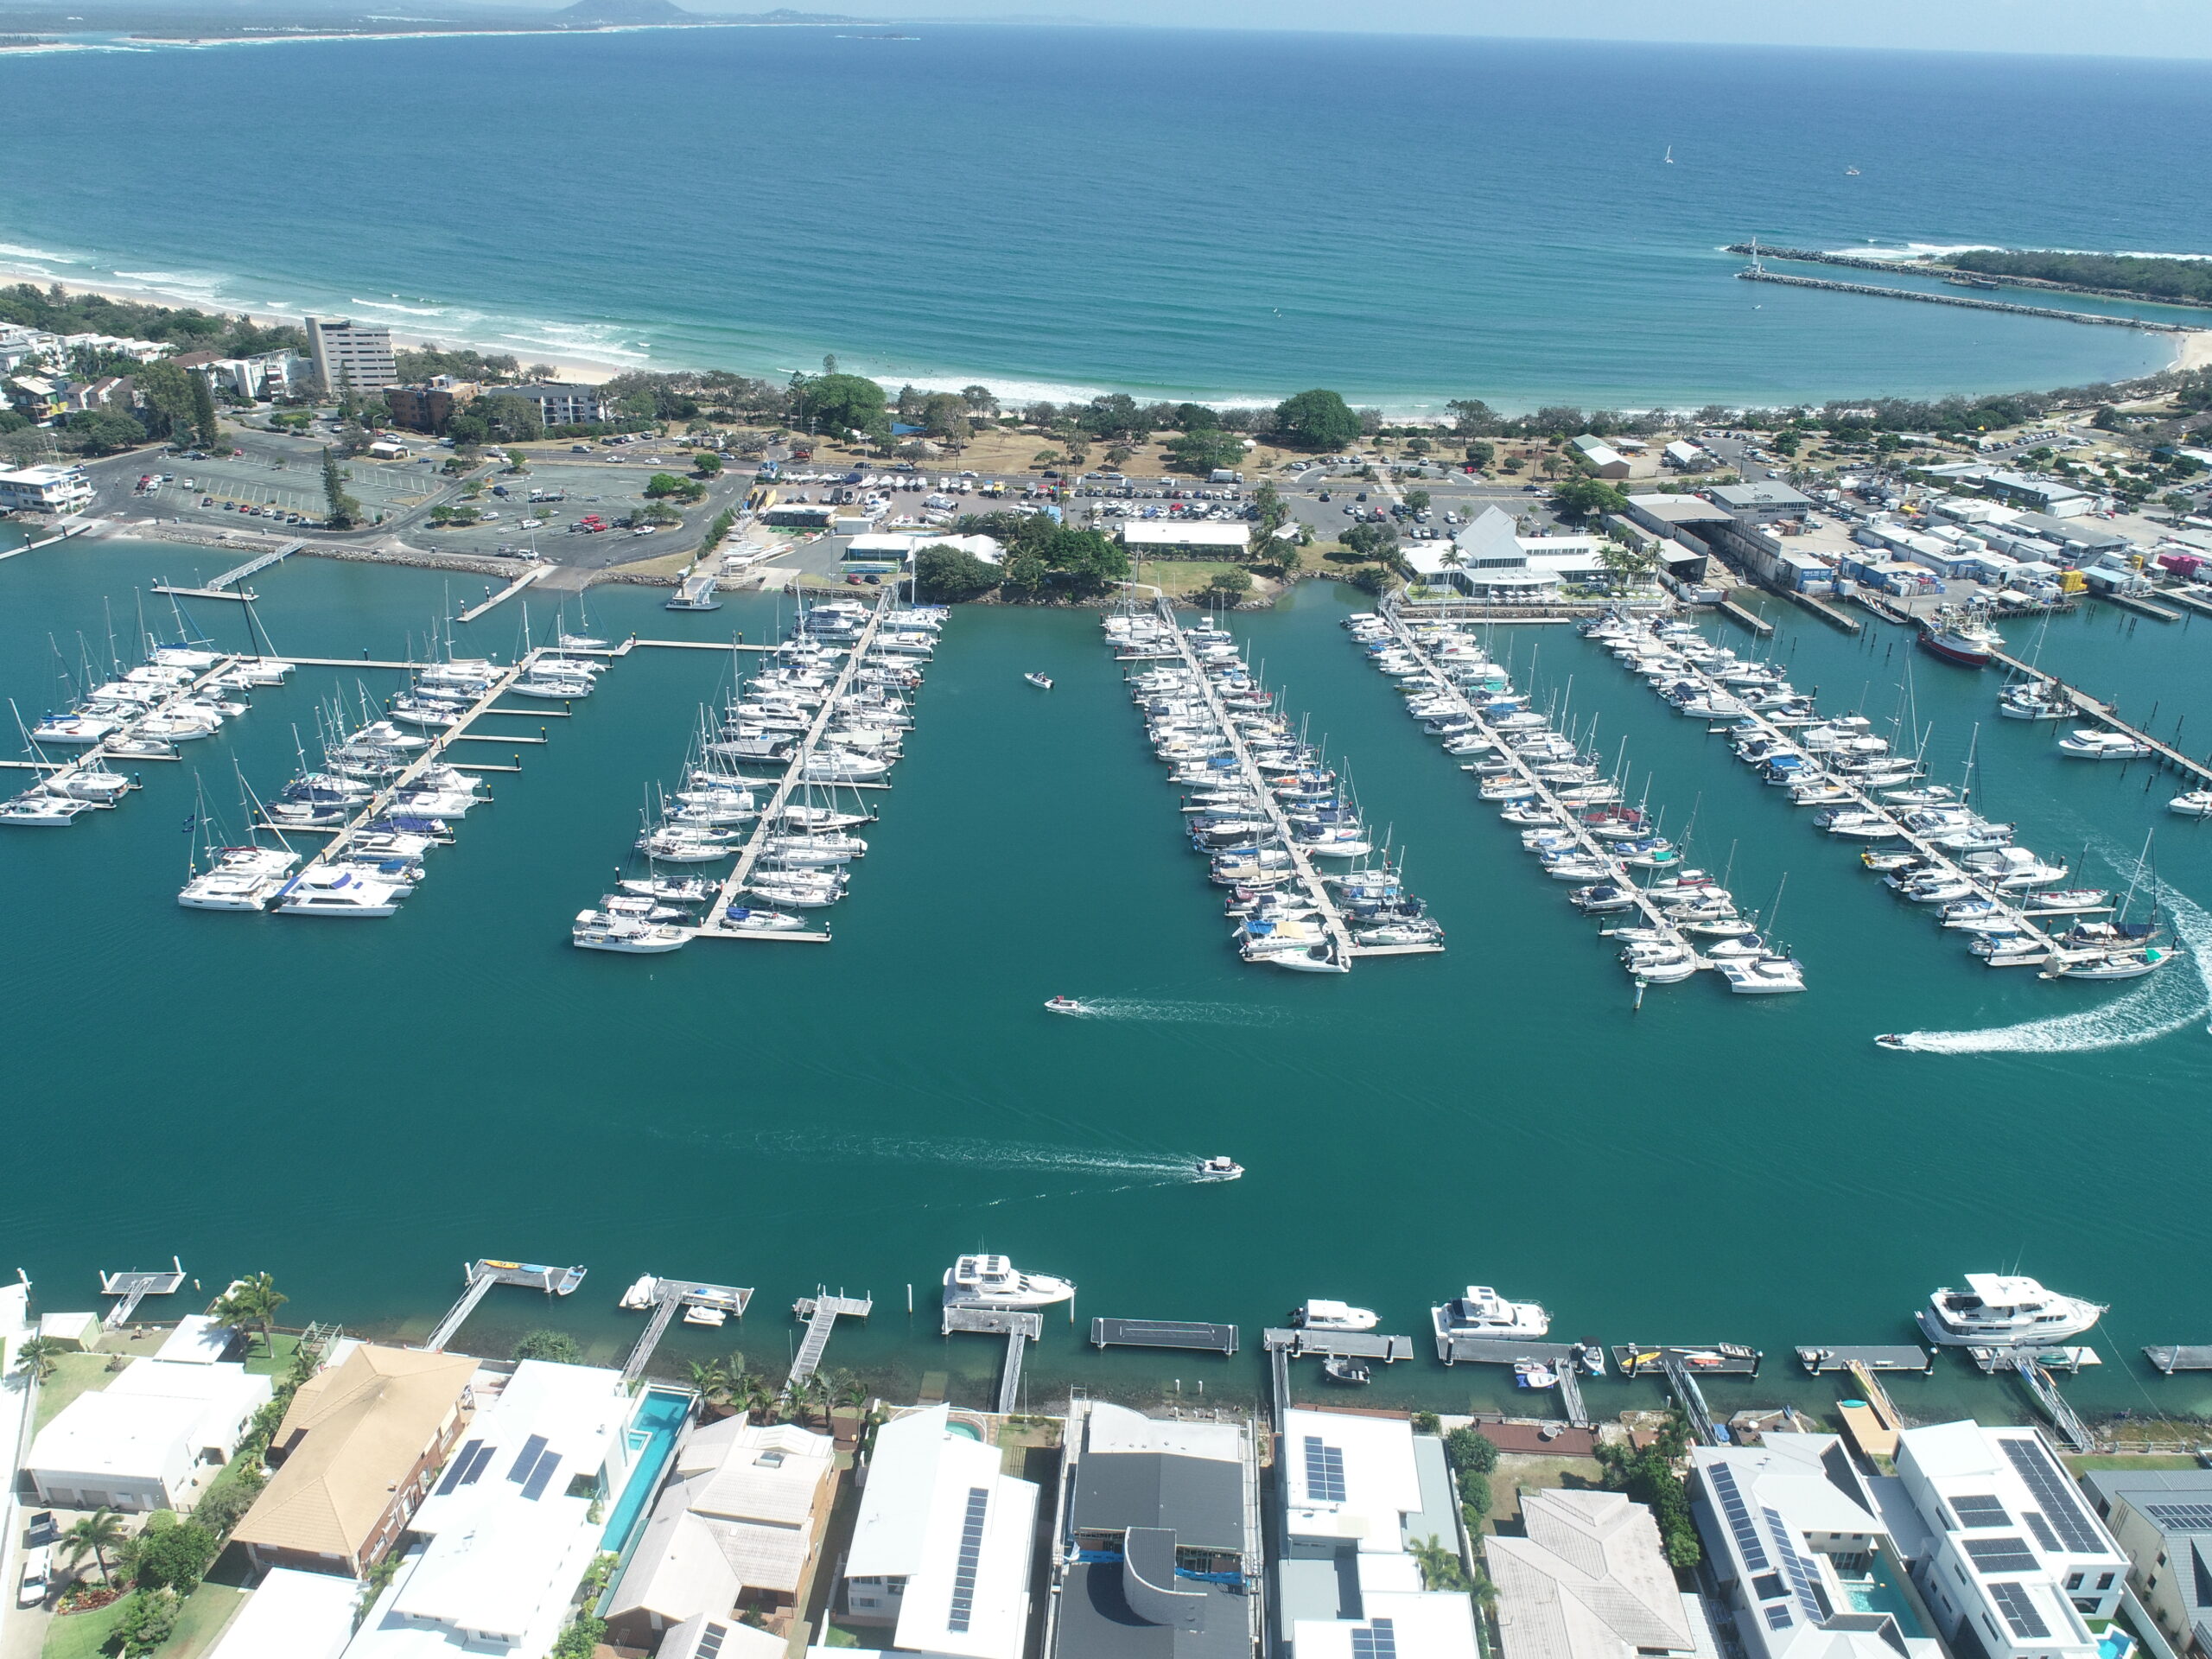 Smart software and yachting boom driving success in Mooloolaba